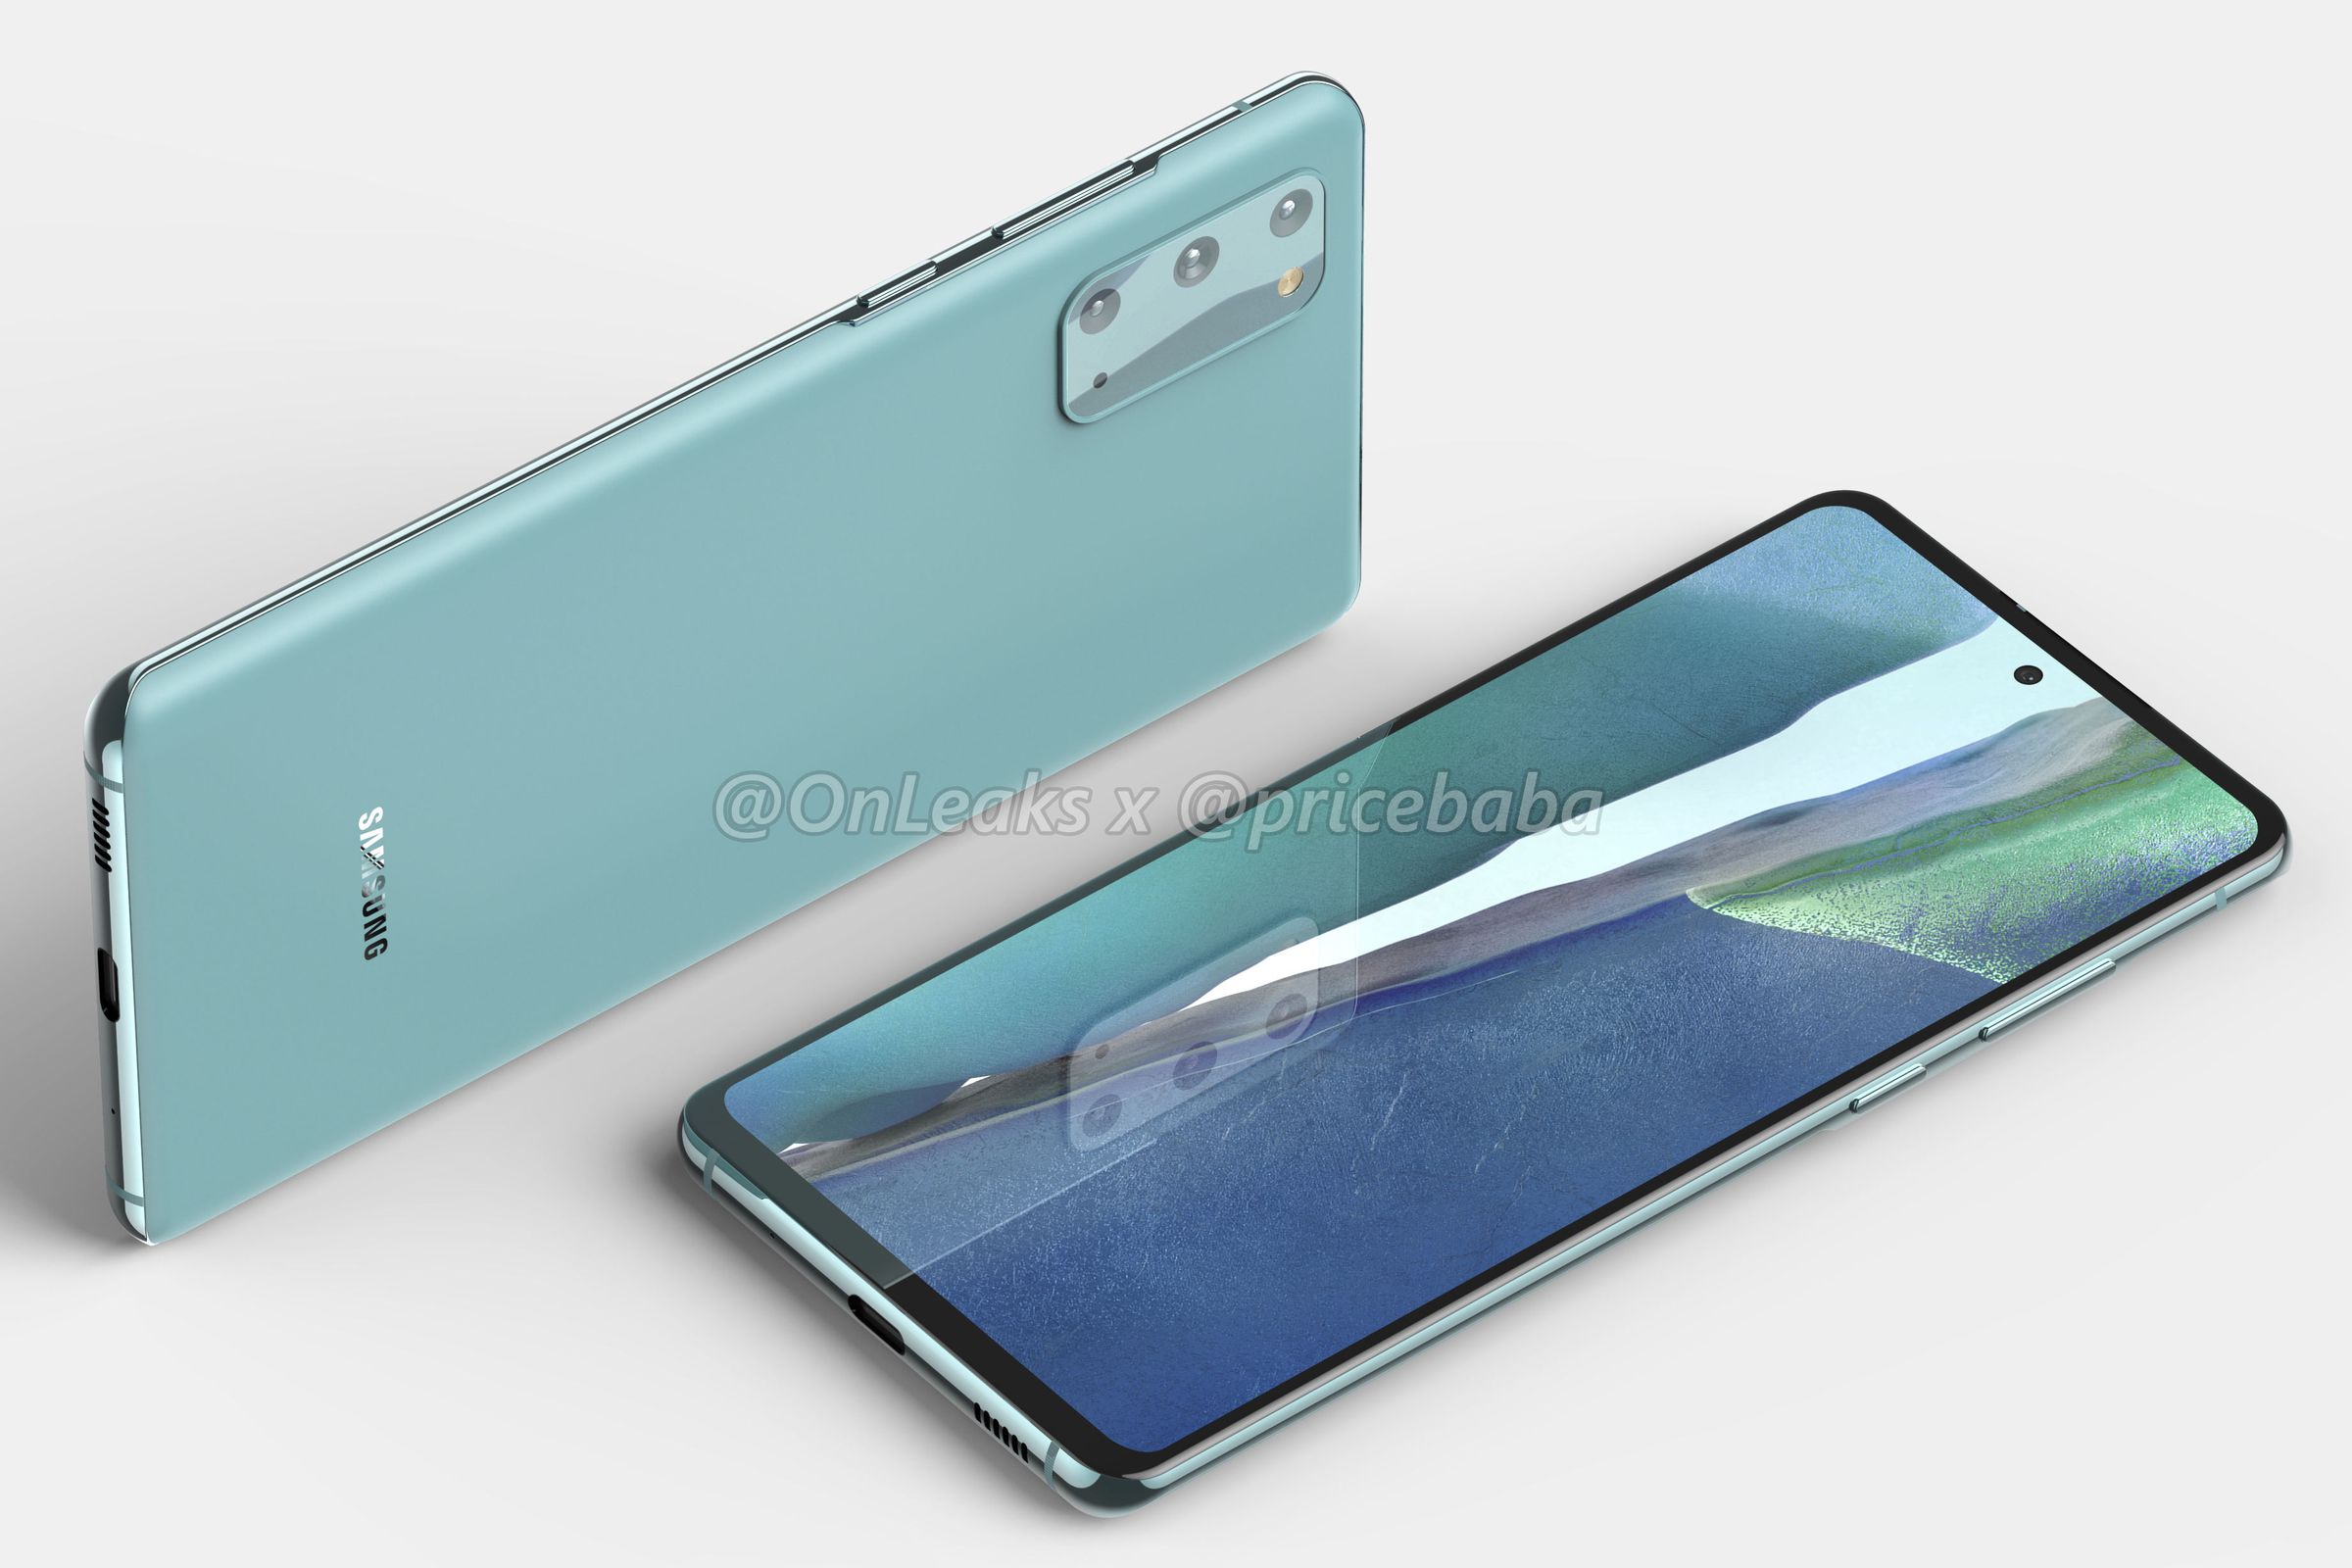 Unofficial renders published over the weekend show a similar design for the unannounced handset.